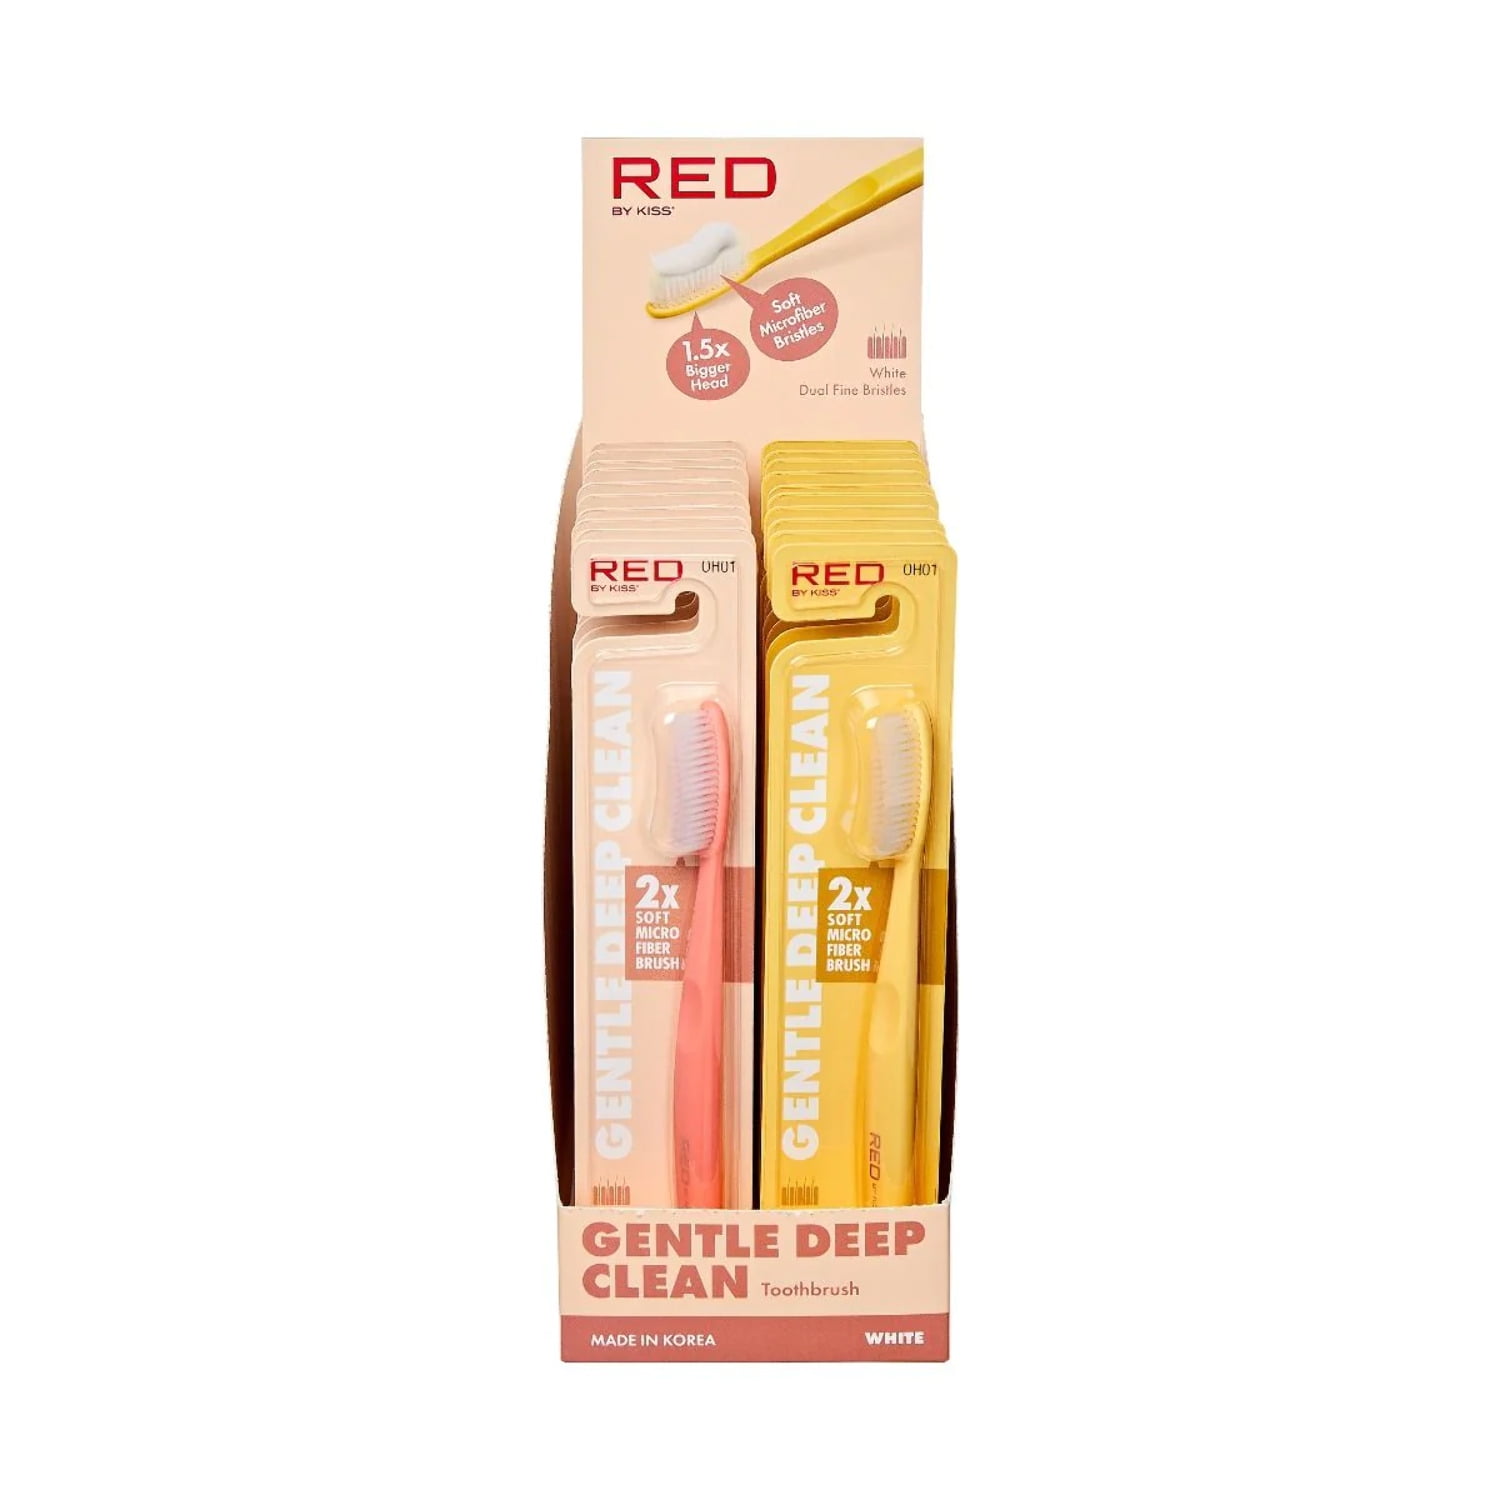 Red by Kiss Gentle Deep Clean Tooth Brush 2X Soft Micro Fiber Brush, Made  in Korea 2 Pack (White)